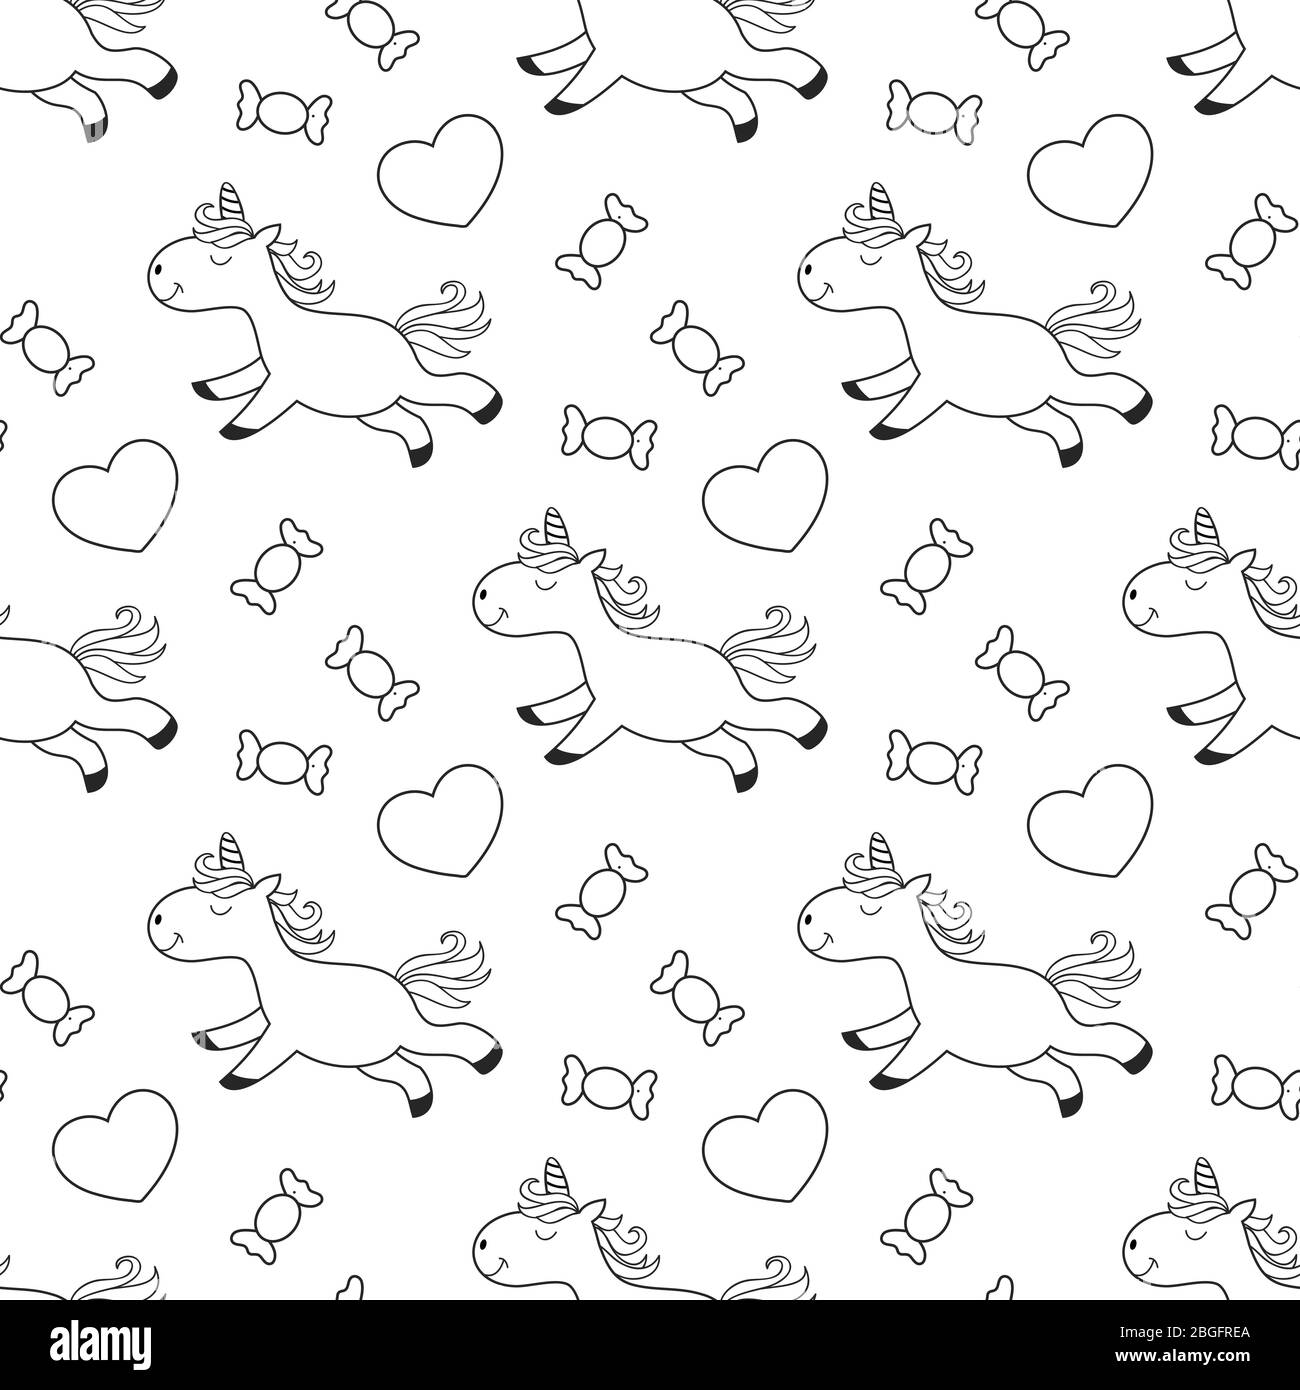 Unicorn coloring page pattern background with sweets for kids. Vector illustration Stock Vector